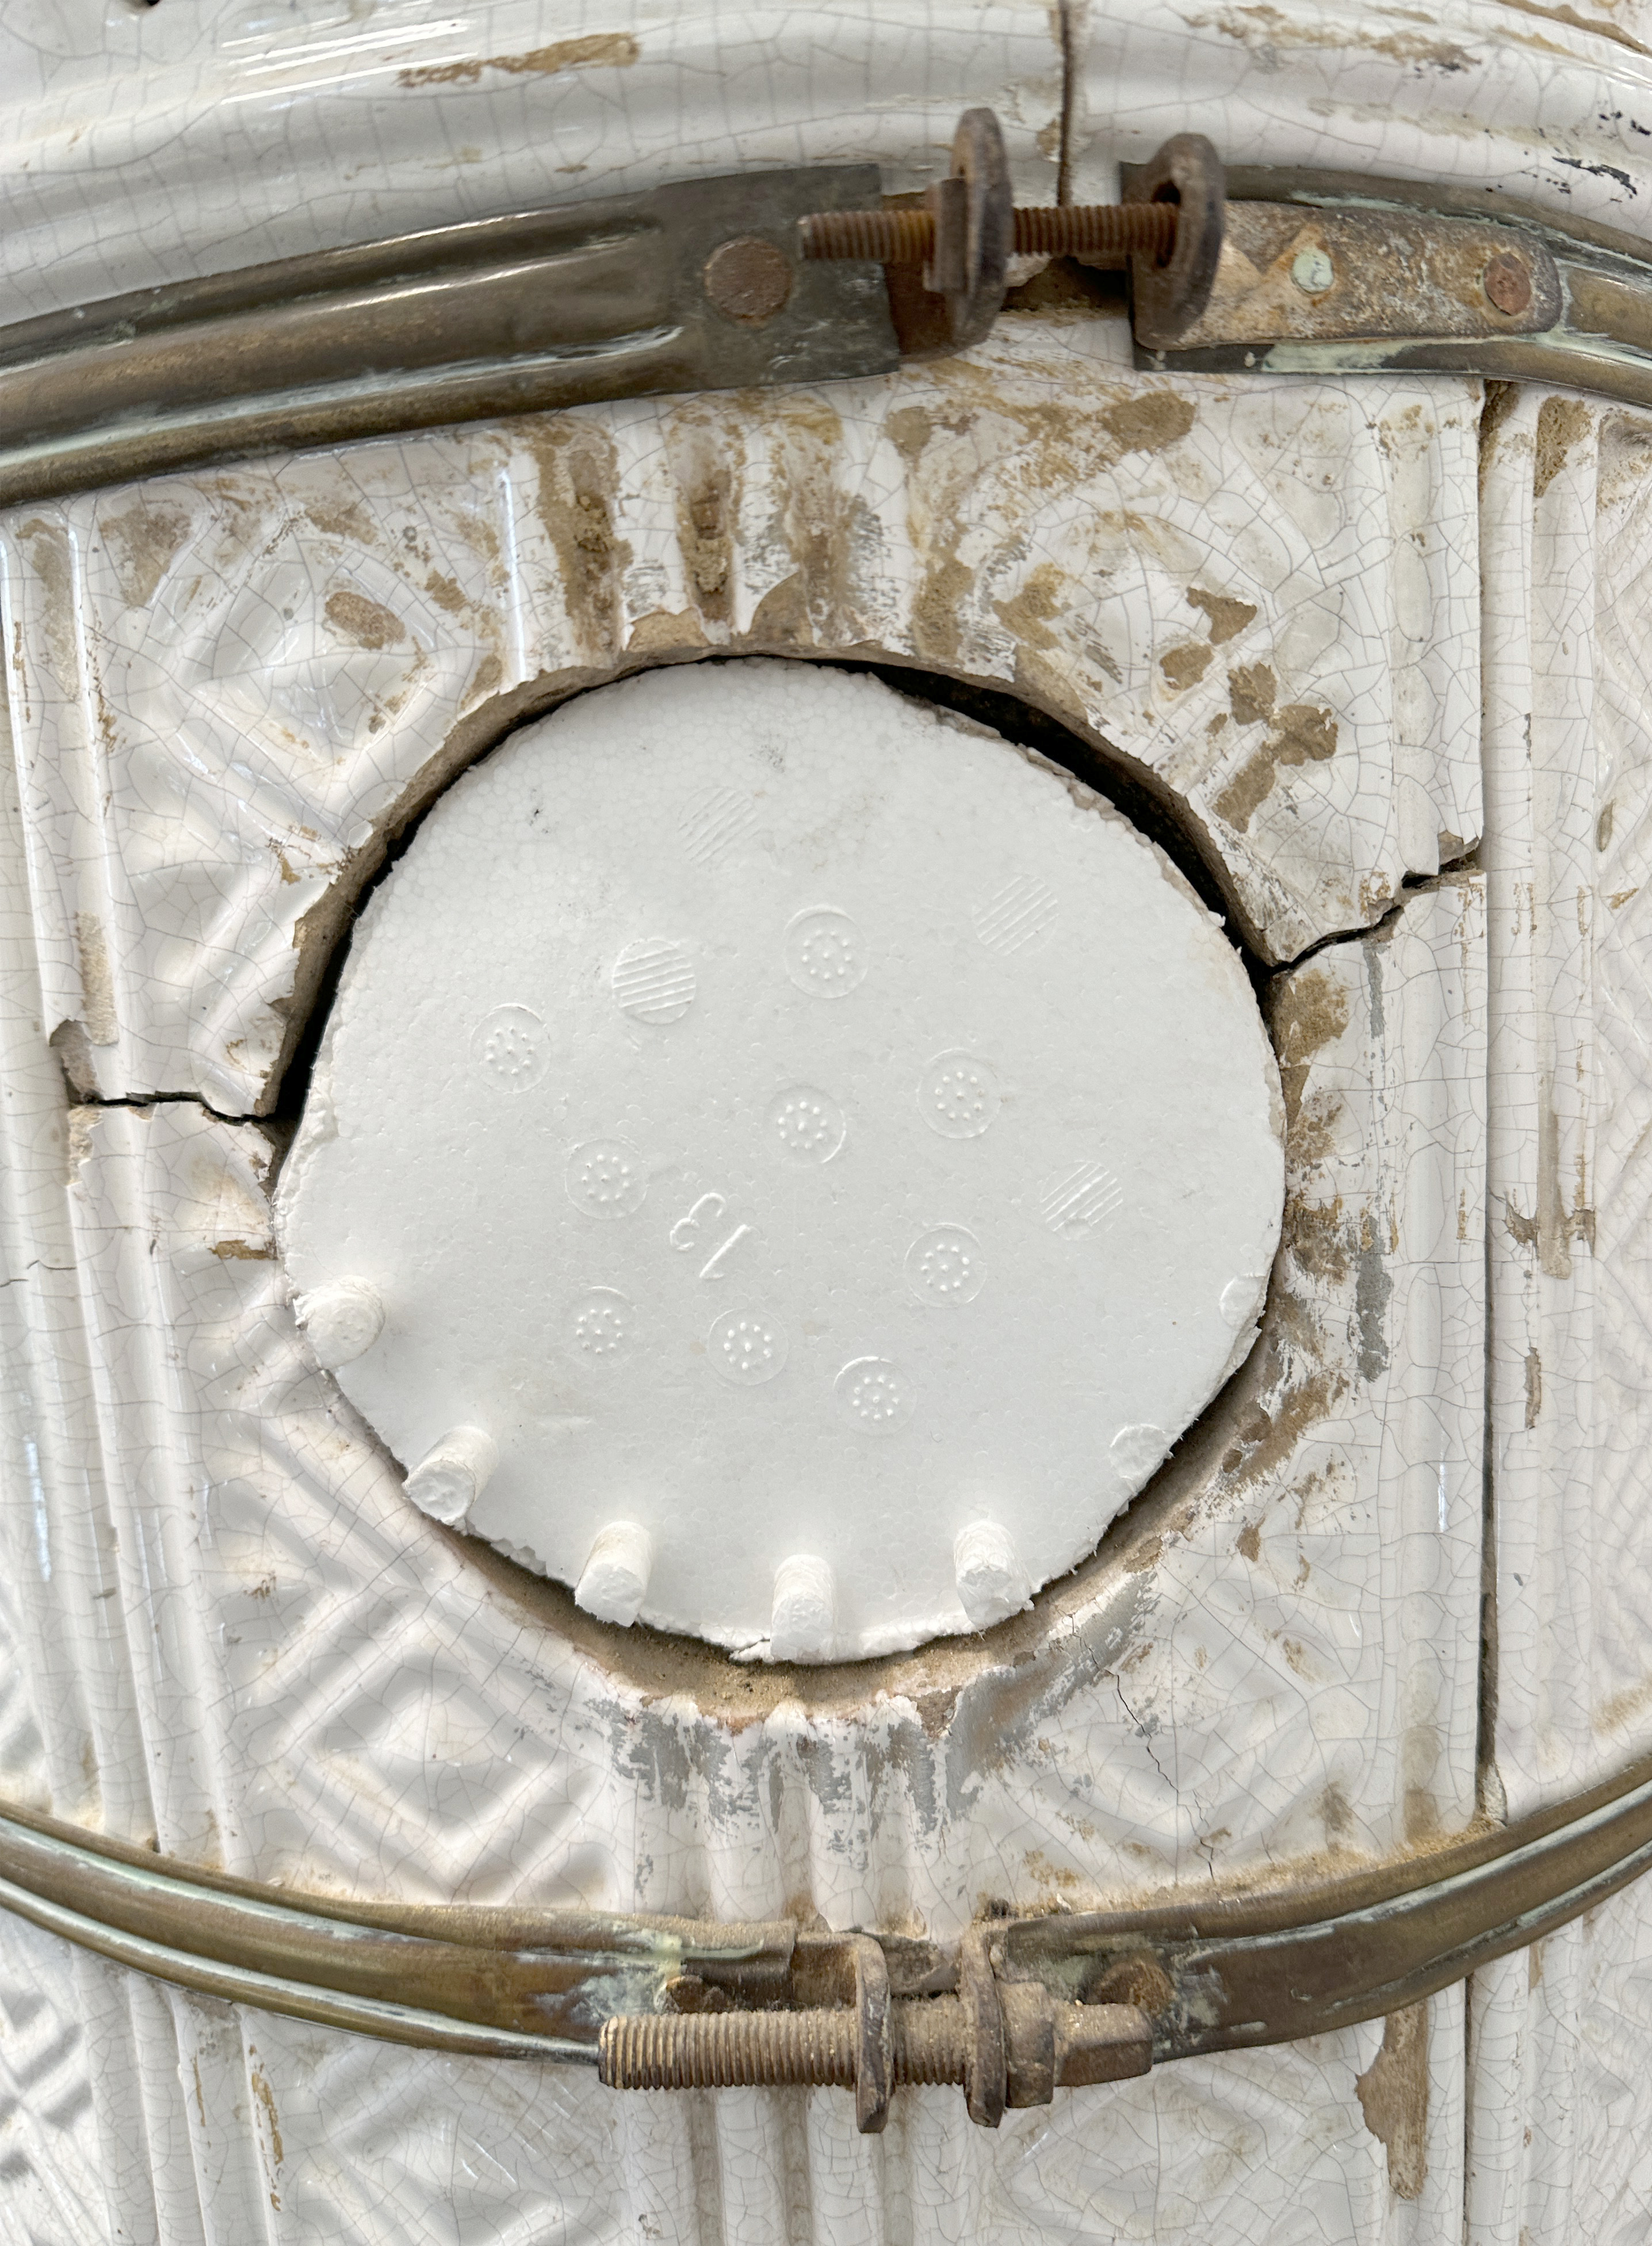 White Biedermeier round stove with tiles in relief structure. - Image 14 of 19